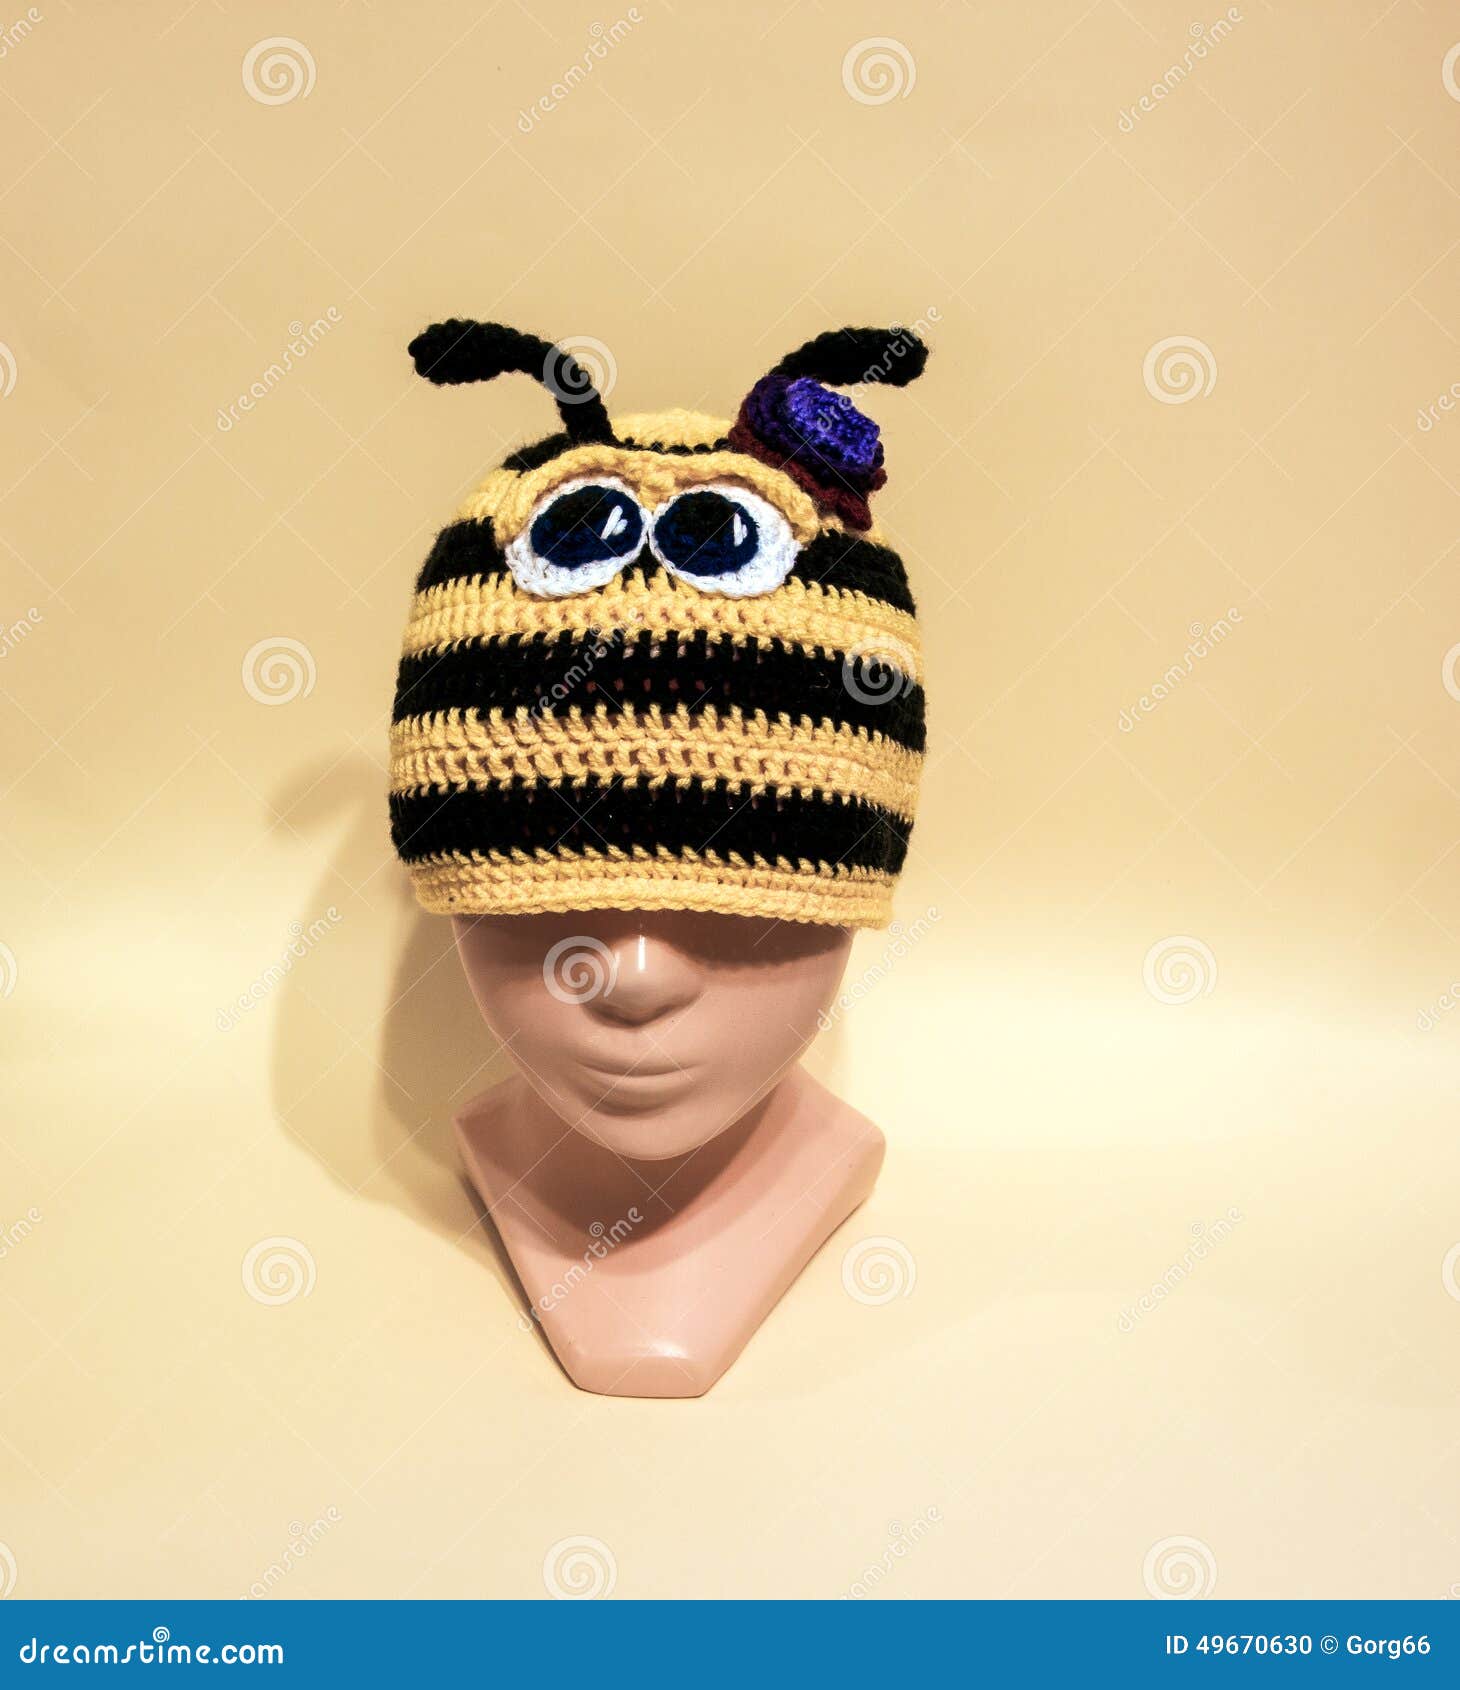 Bee woolen hat for kids stock photo. Image of insect - 49670630